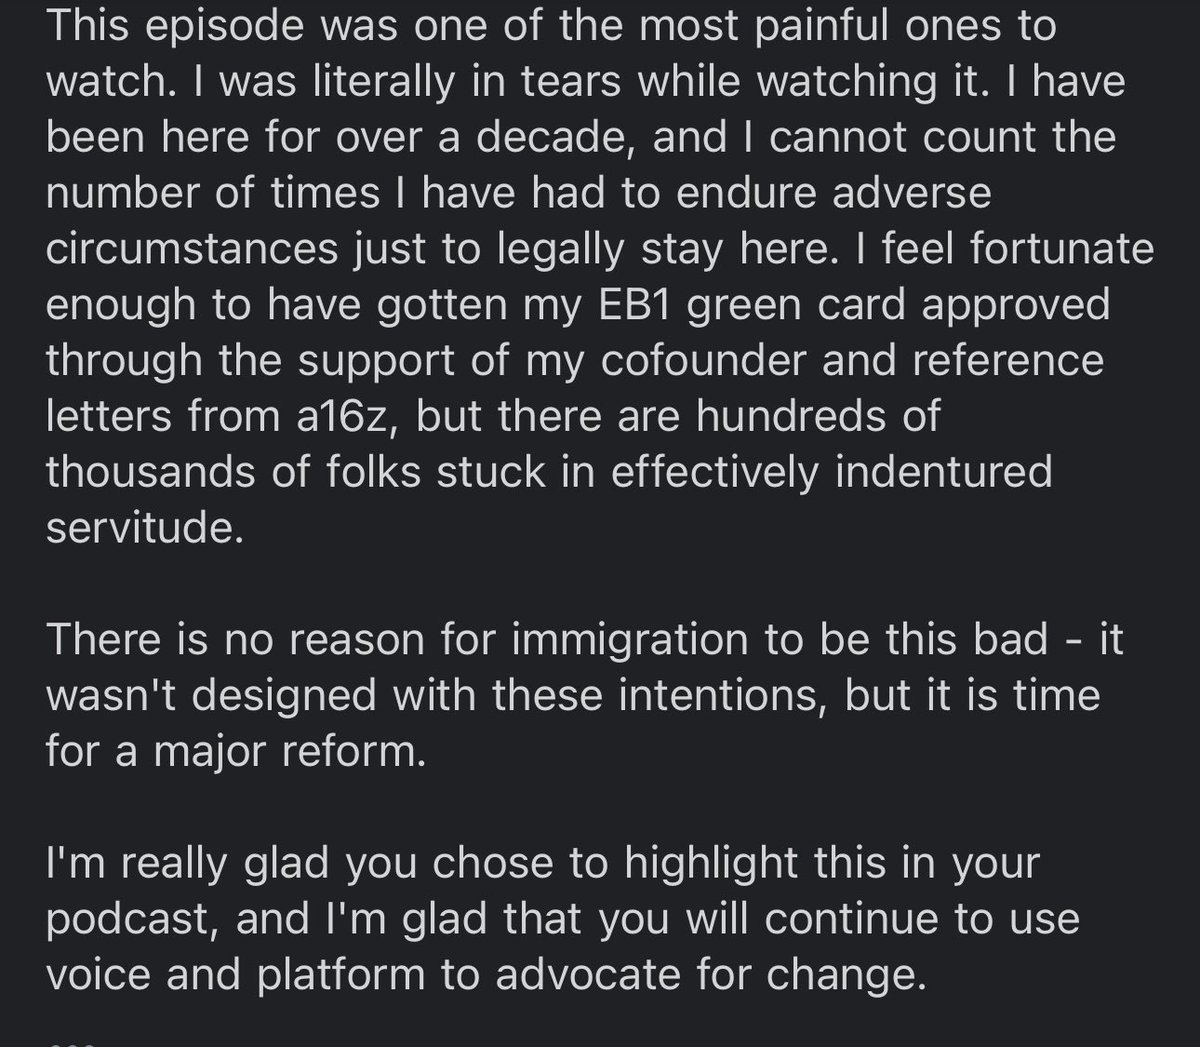 One of many notes @aarthir and I got for our episode with @deedydas on skilled immigration. This is from someone in the a16z family I haven’t met yet - sharing with permission. Many many many such stories.